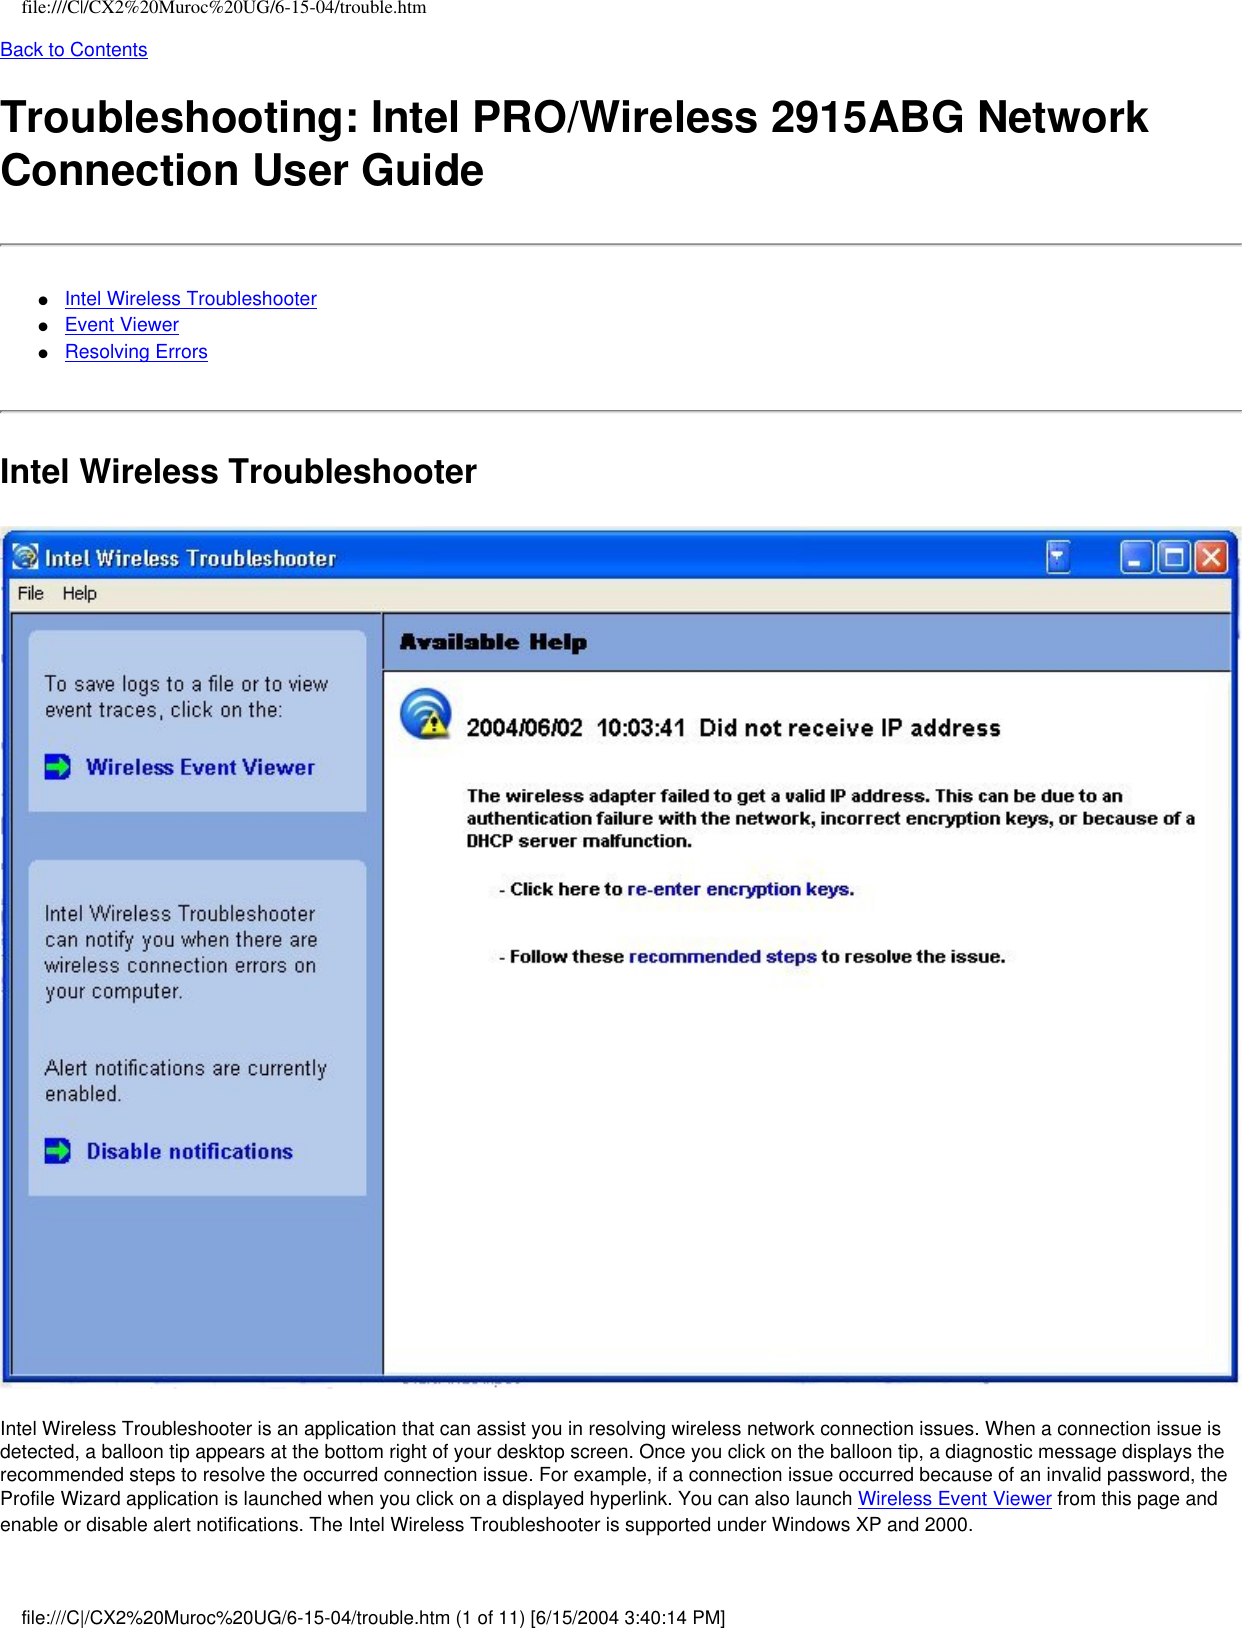 file:///C|/CX2%20Muroc%20UG/6-15-04/trouble.htmBack to ContentsTroubleshooting: Intel PRO/Wireless 2915ABG Network Connection User Guide●     Intel Wireless Troubleshooter●     Event Viewer●     Resolving ErrorsIntel Wireless Troubleshooter Intel Wireless Troubleshooter is an application that can assist you in resolving wireless network connection issues. When a connection issue is detected, a balloon tip appears at the bottom right of your desktop screen. Once you click on the balloon tip, a diagnostic message displays the recommended steps to resolve the occurred connection issue. For example, if a connection issue occurred because of an invalid password, the Profile Wizard application is launched when you click on a displayed hyperlink. You can also launch Wireless Event Viewer from this page and enable or disable alert notifications. The Intel Wireless Troubleshooter is supported under Windows XP and 2000.file:///C|/CX2%20Muroc%20UG/6-15-04/trouble.htm (1 of 11) [6/15/2004 3:40:14 PM]